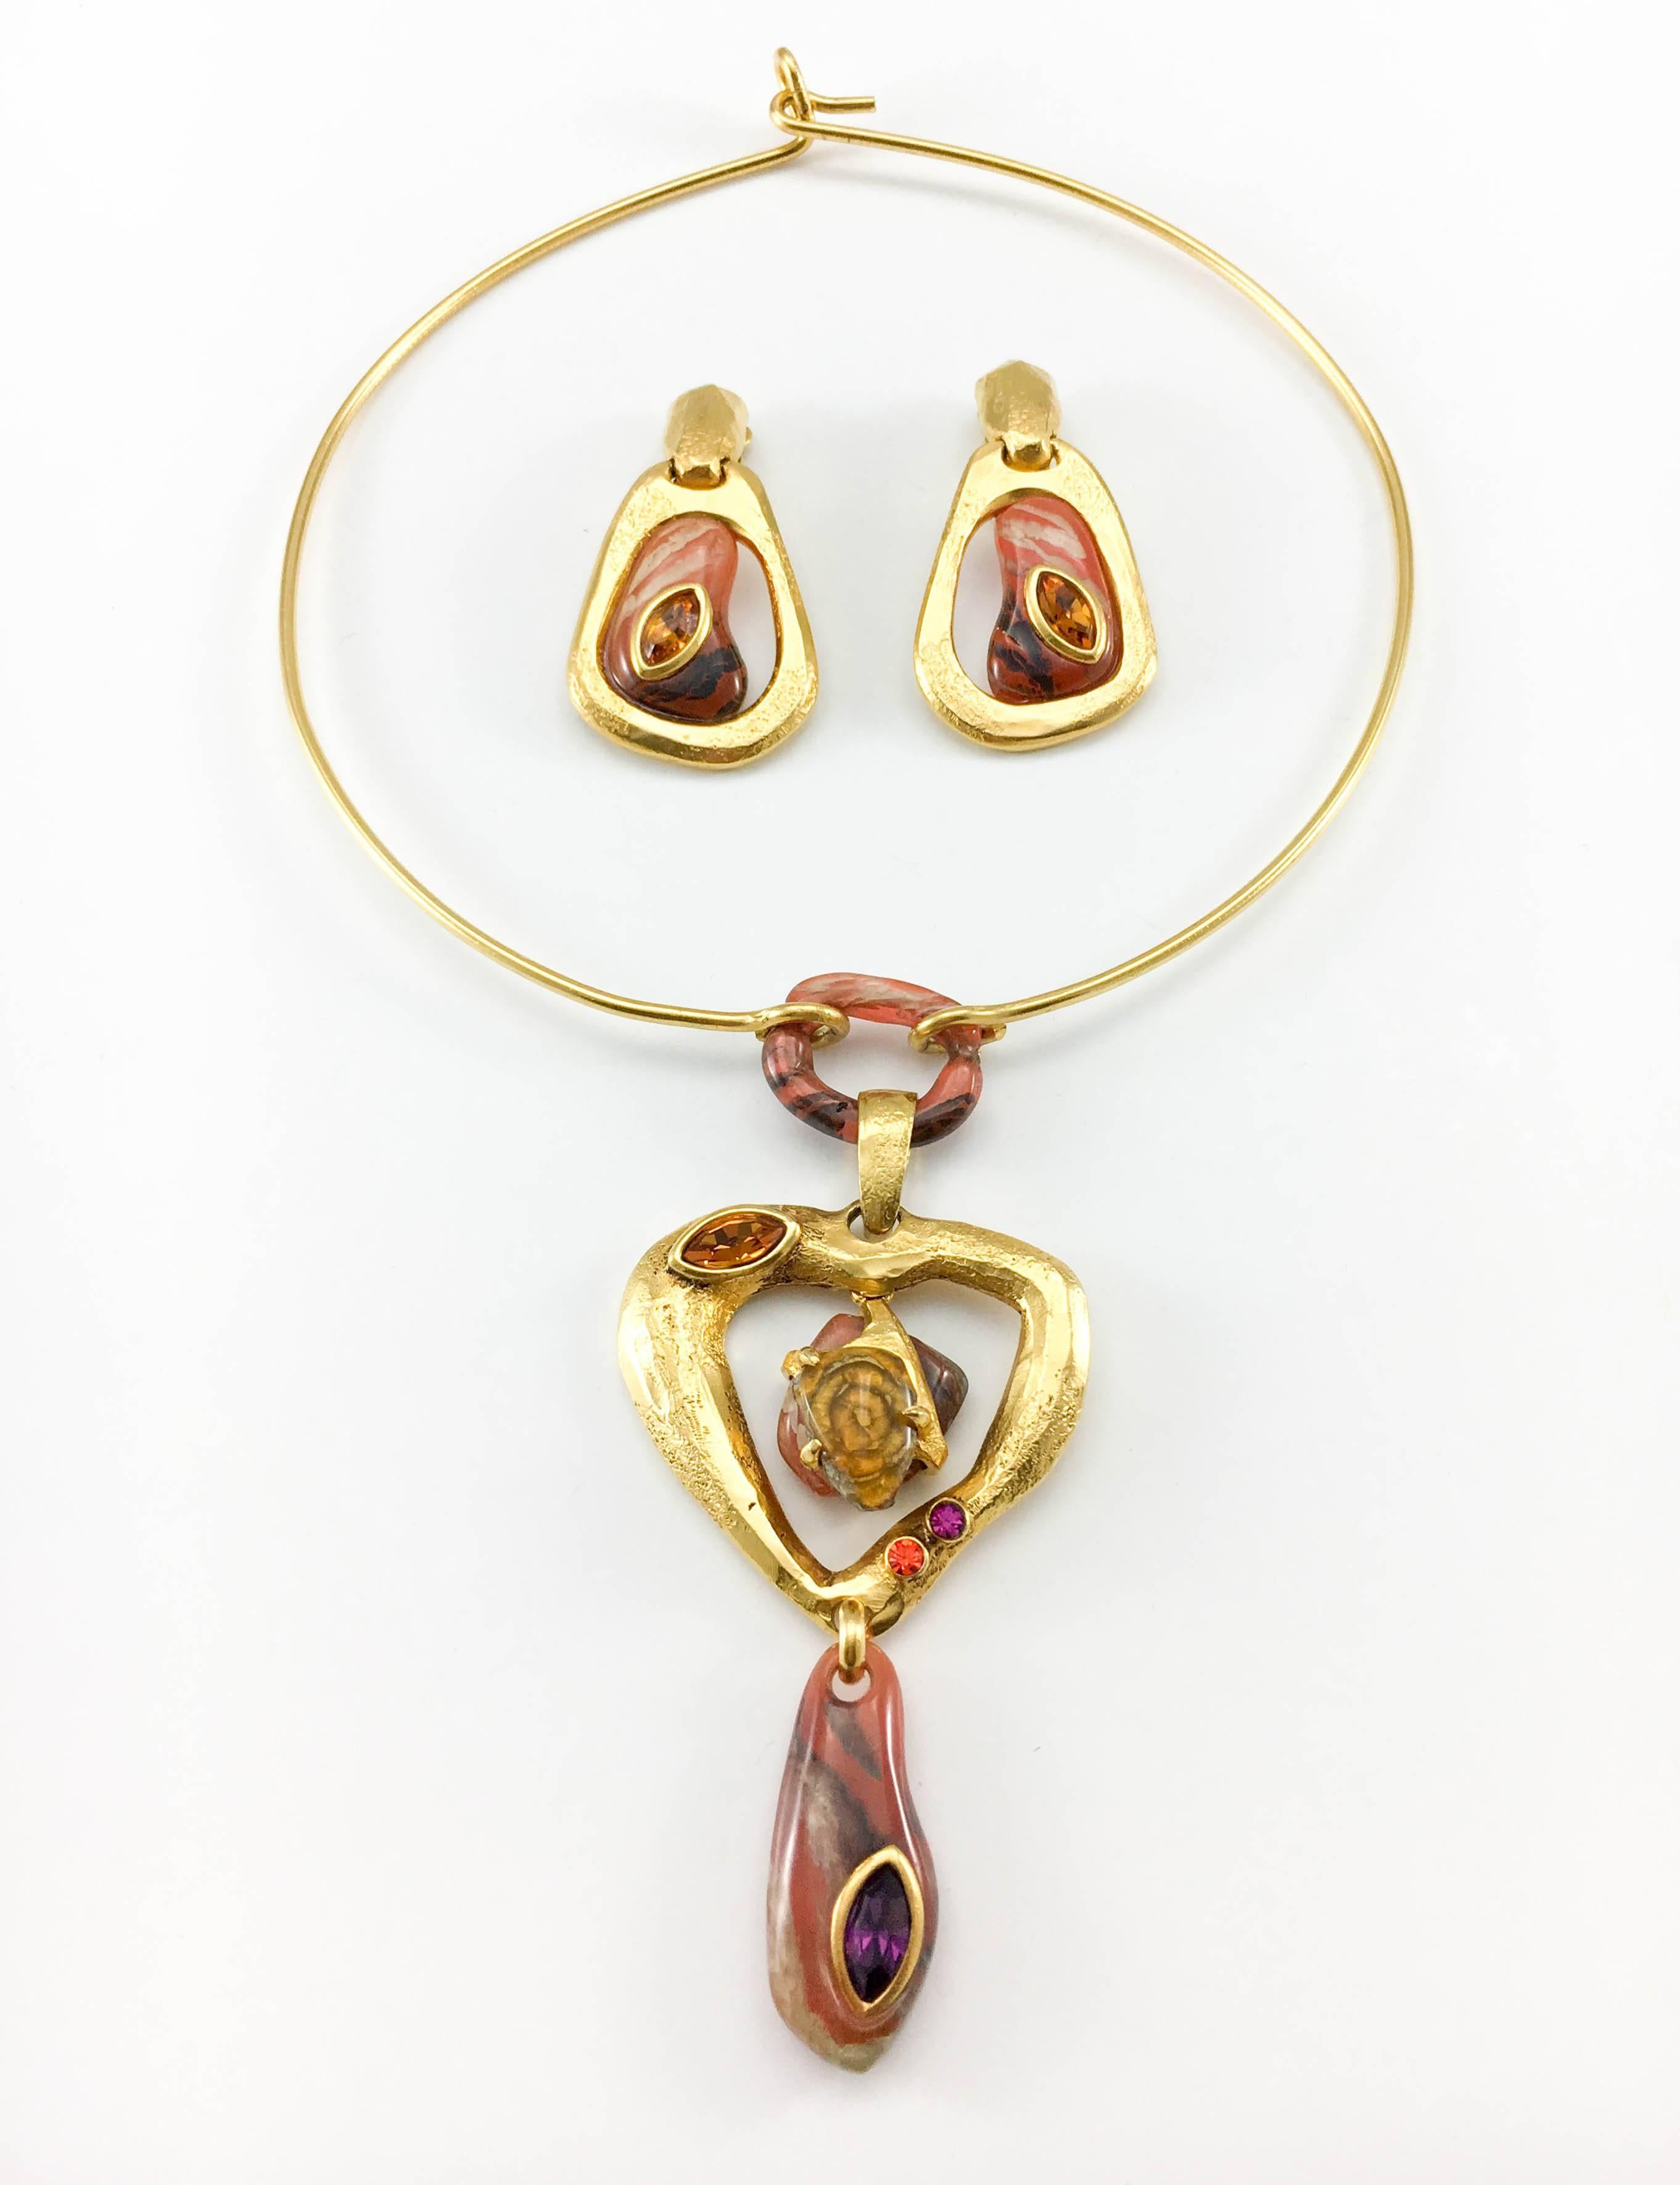 1980s Christian Lacroix Gold-Plated Modernist Necklace and Earrings Set In Excellent Condition In London, Chelsea